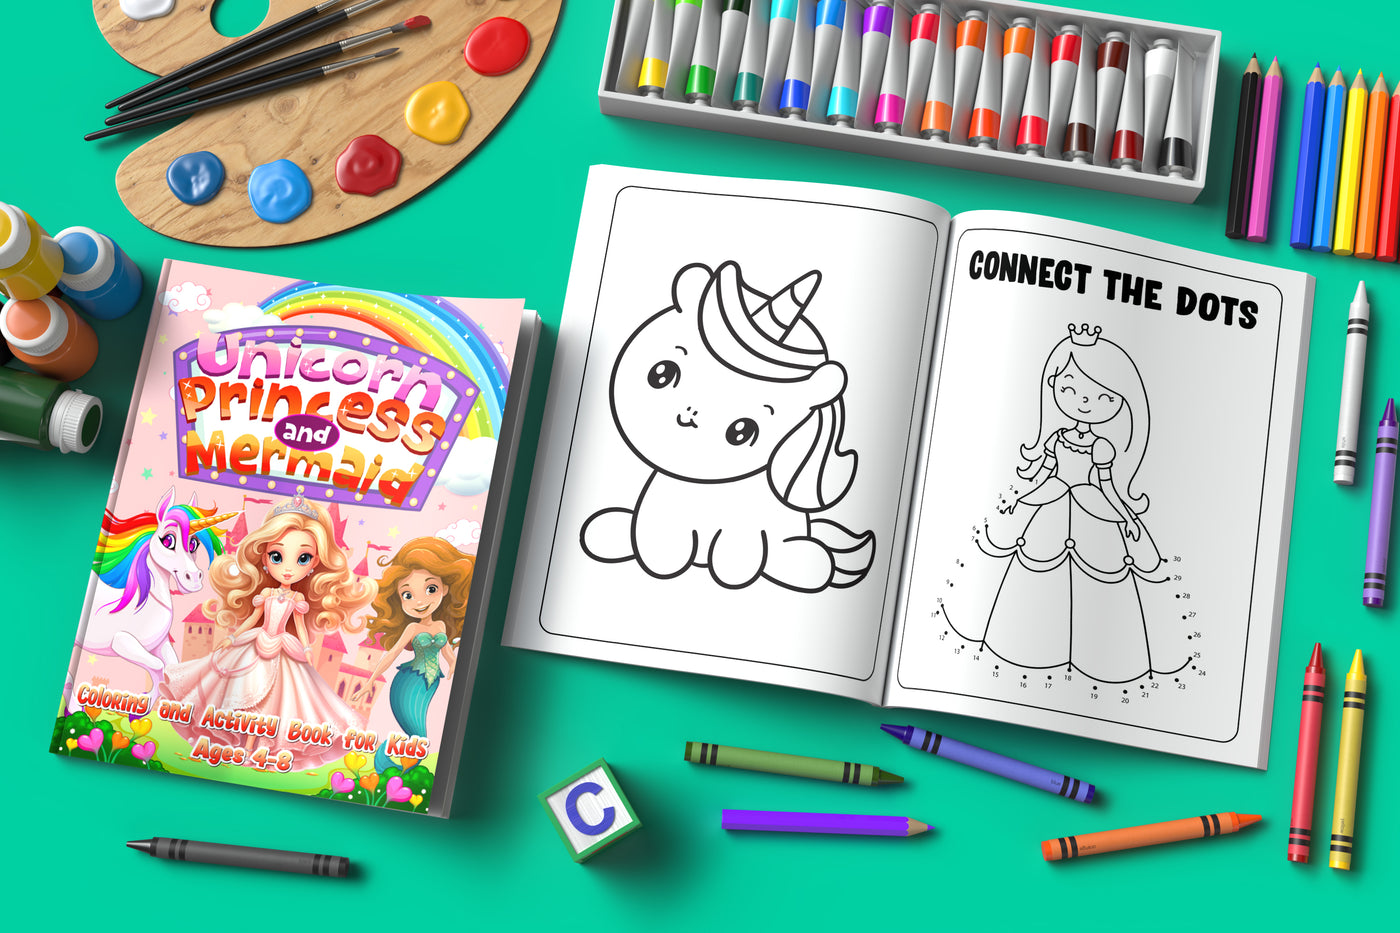 Unicorn Coloring Book For Kids Ages 4-8: Arts & Crafts Kit for